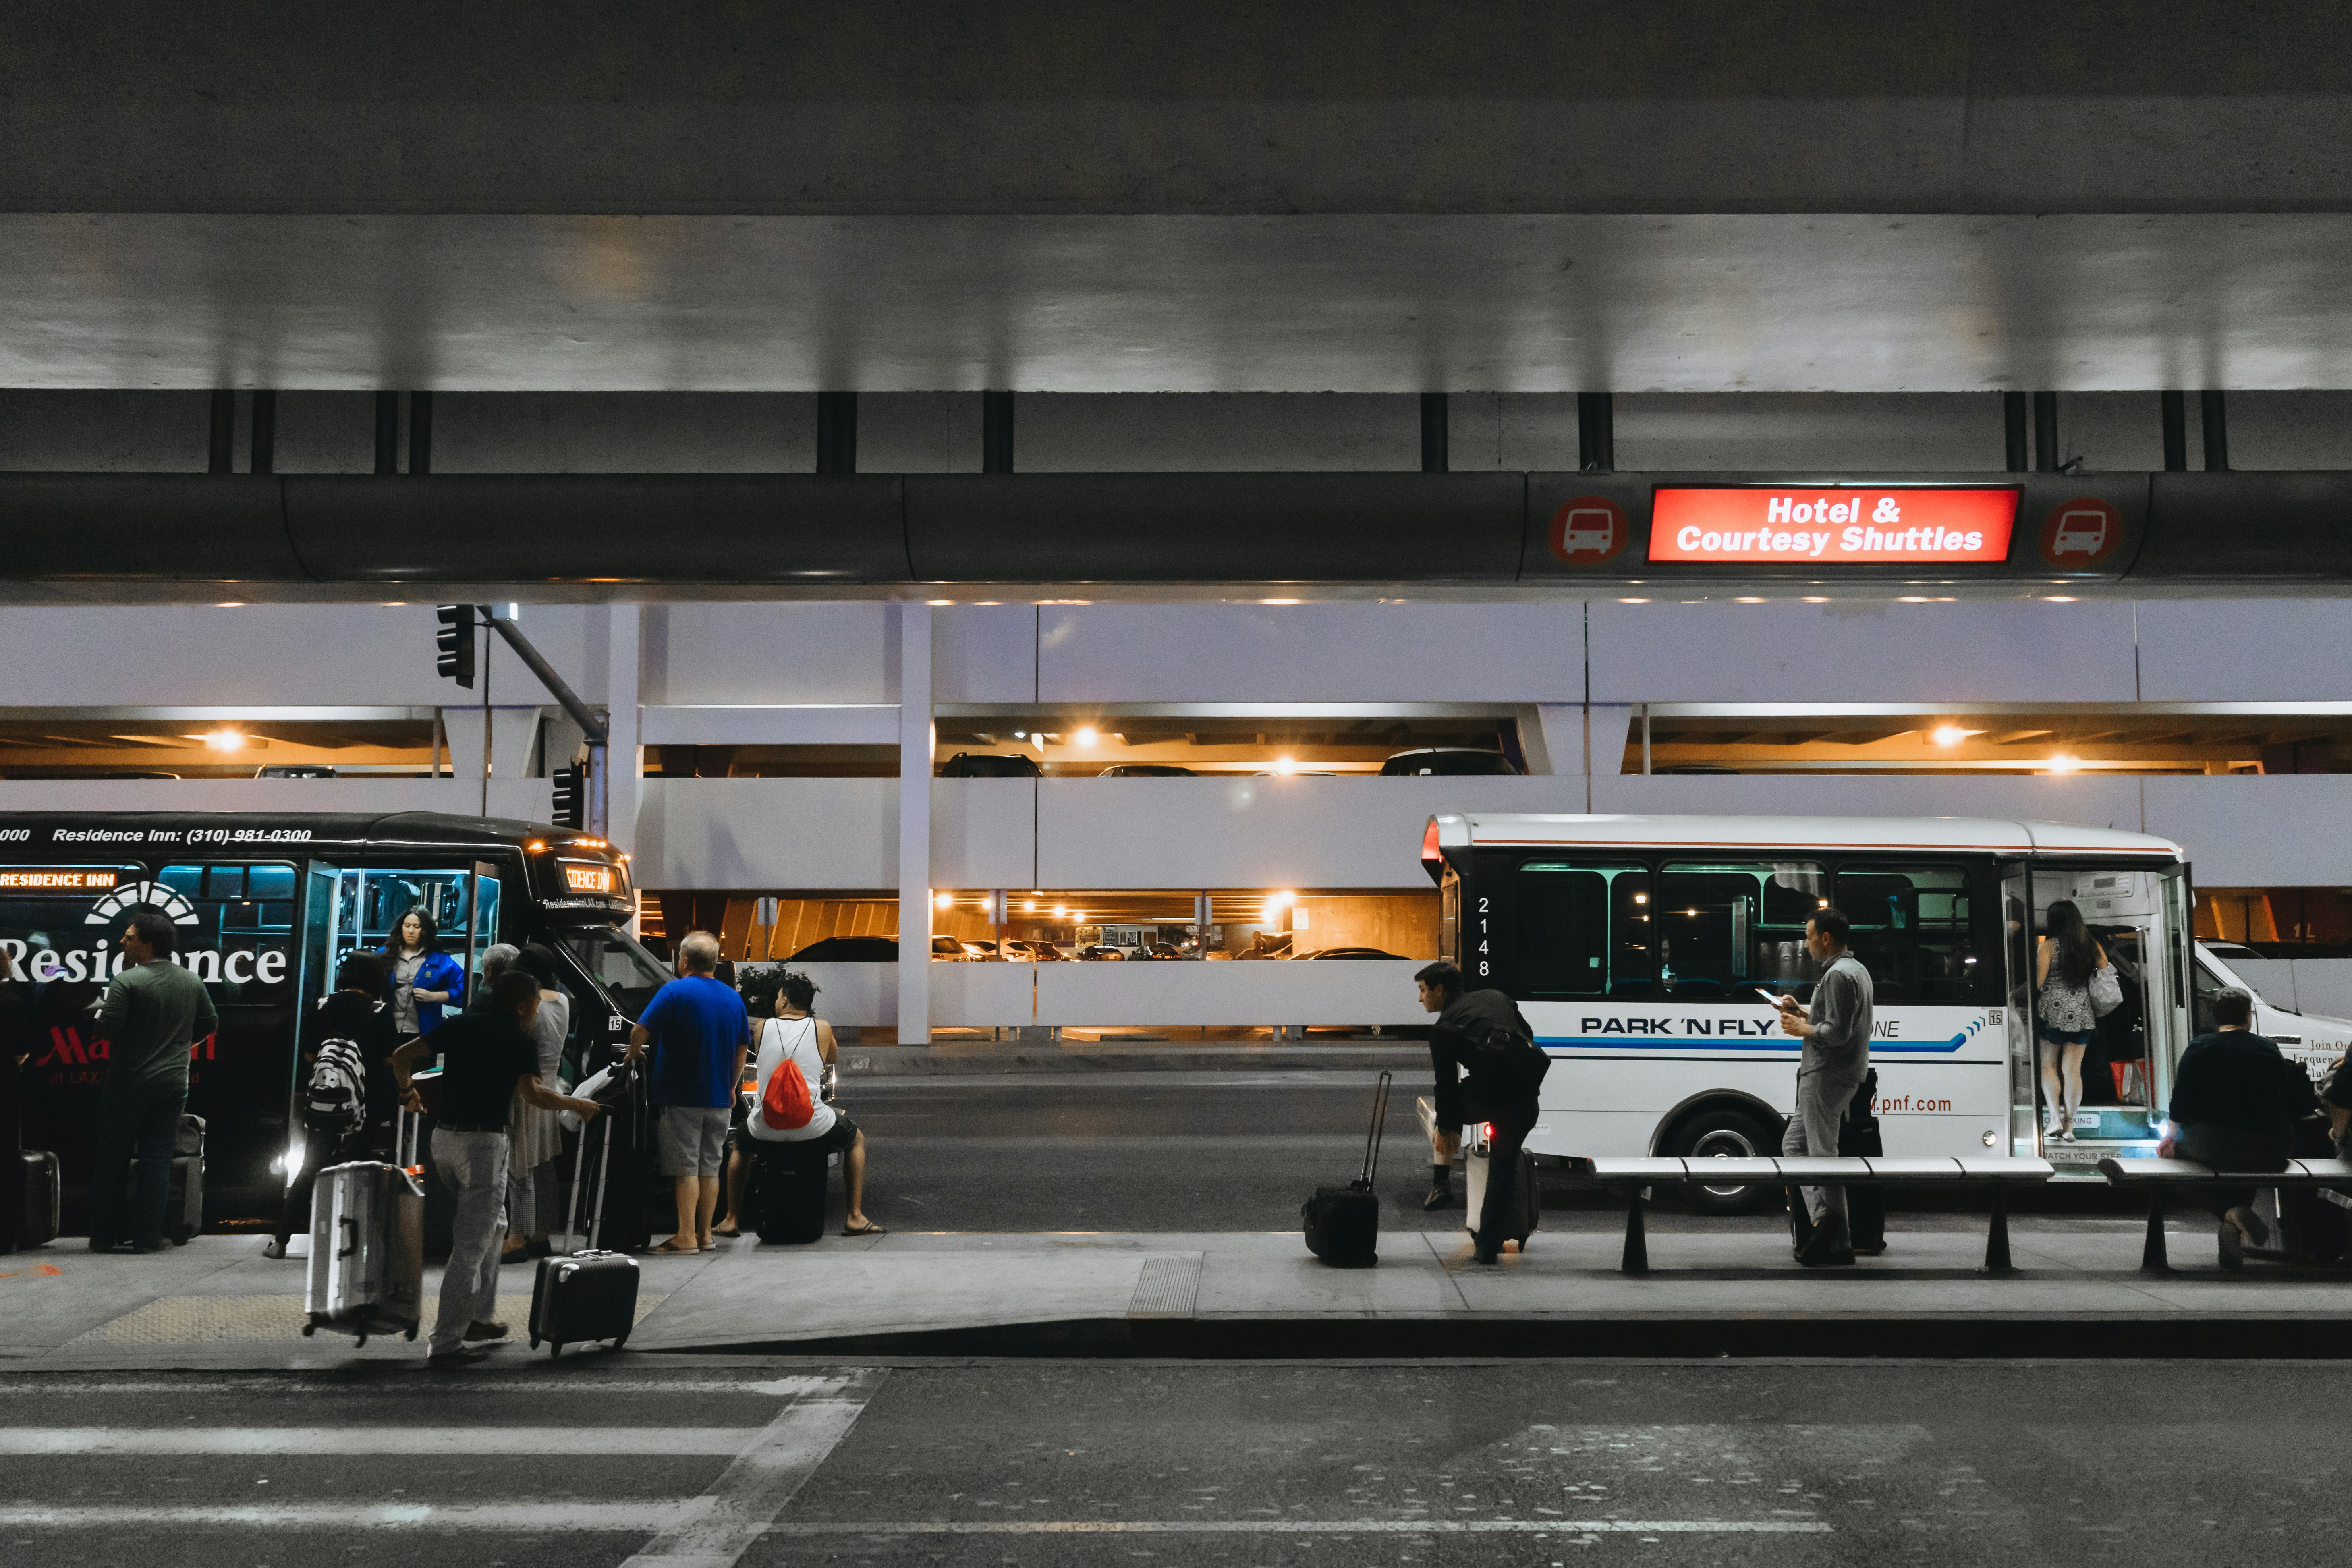 Arrivals queue up at bus stops to catch courtesy shuttle buses to airport hotels at night.